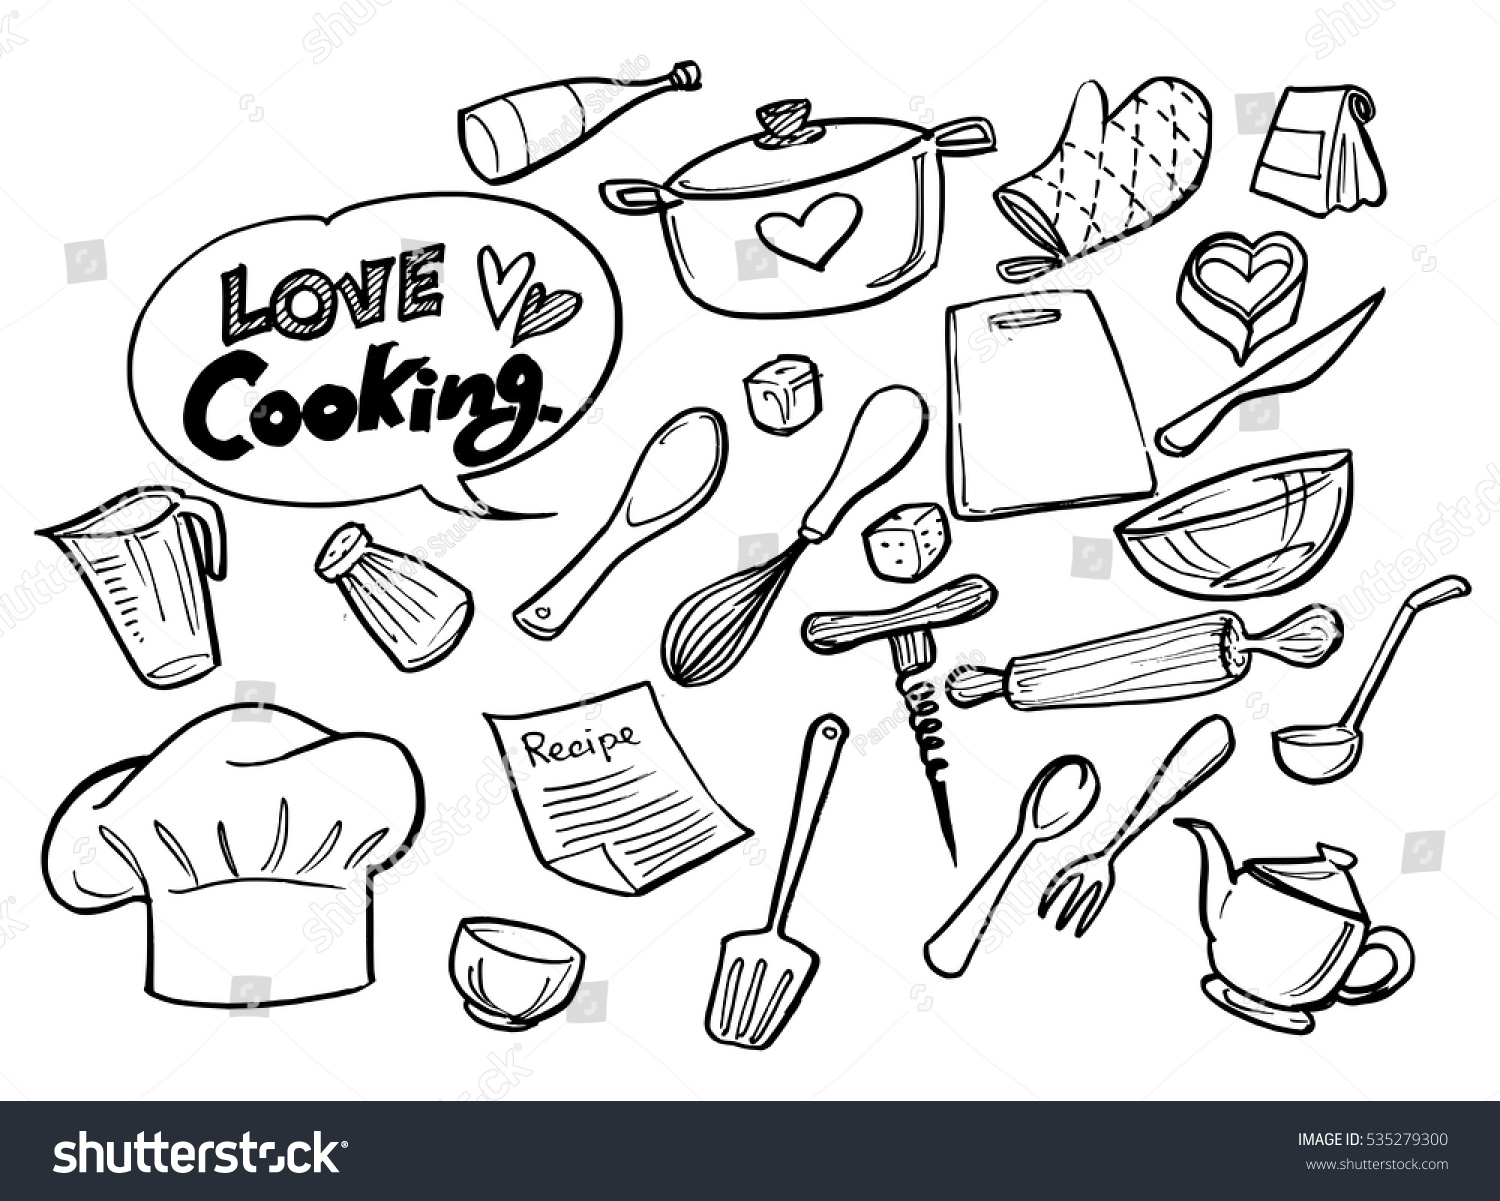 love cooking concept.Poster with hand drawn kitchen utensils.  #535279300